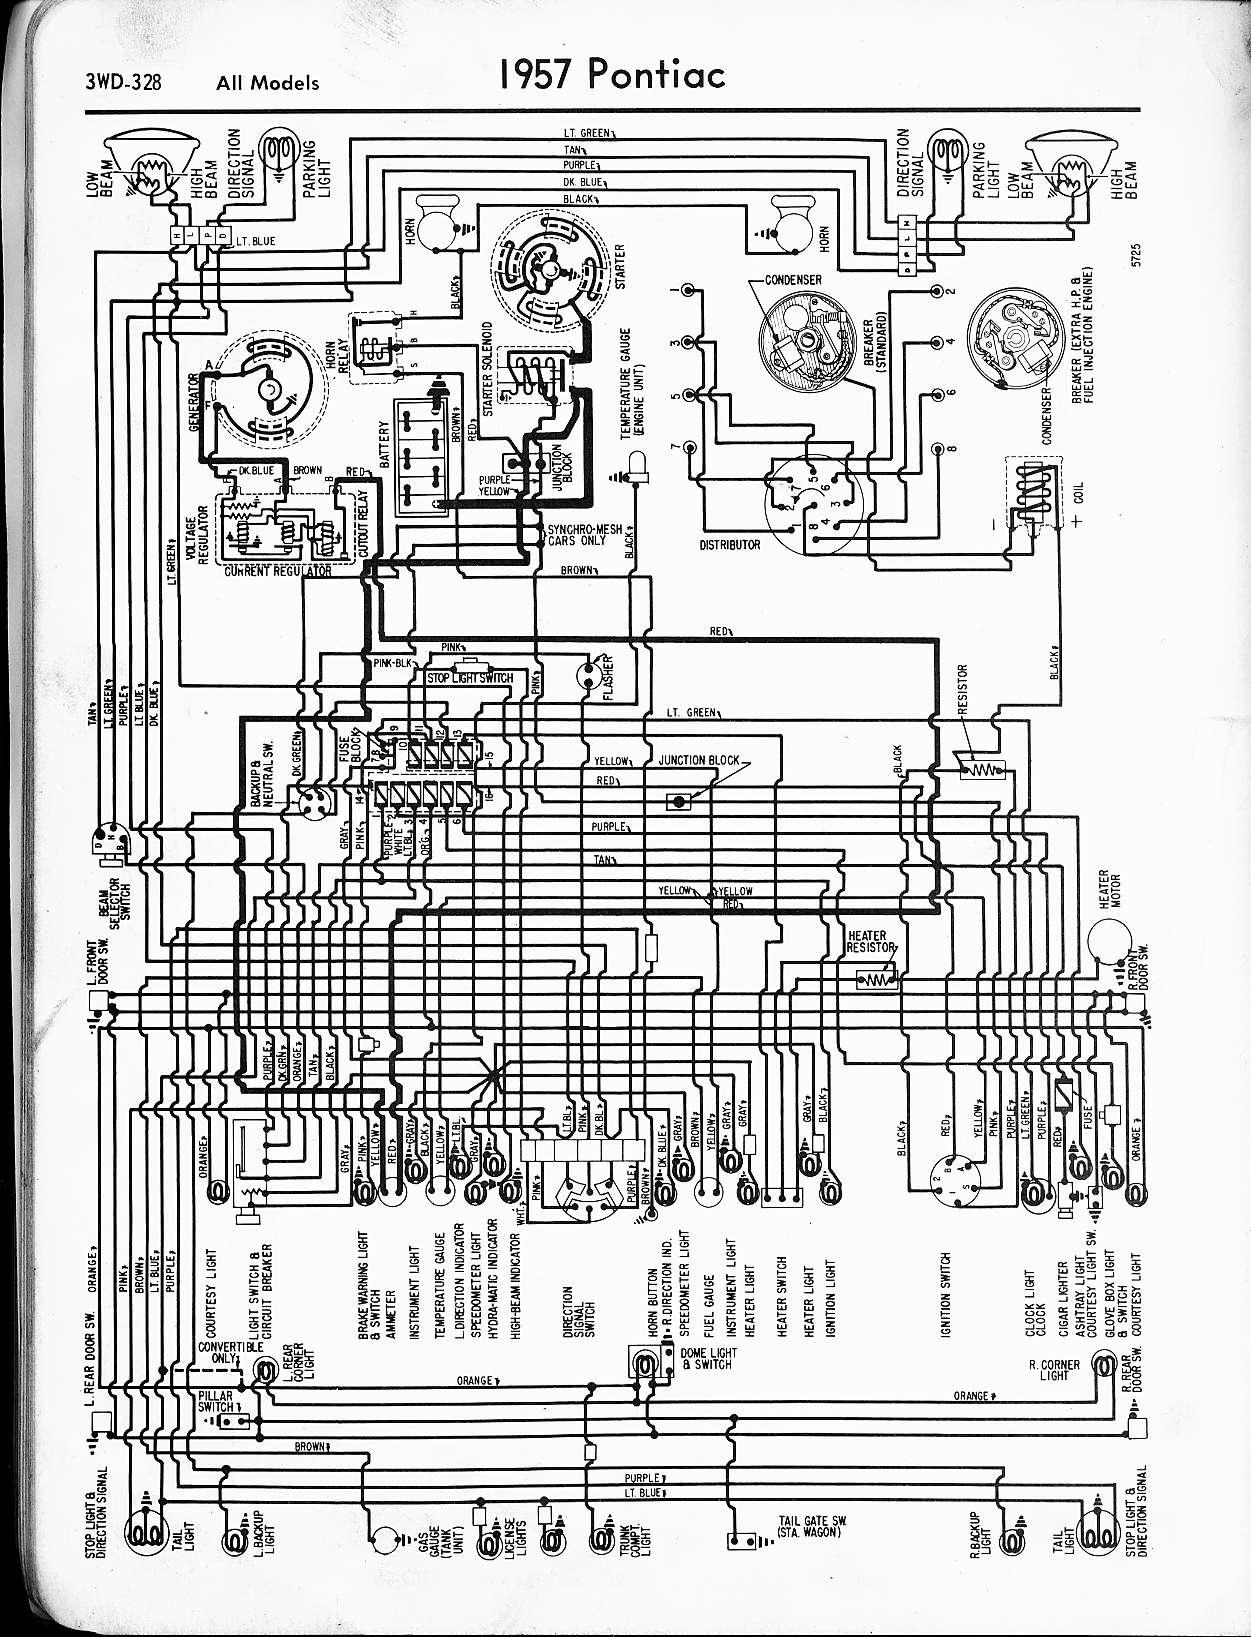 Wiring question for my 55. - Pontiac Questions and Concerns - Forever